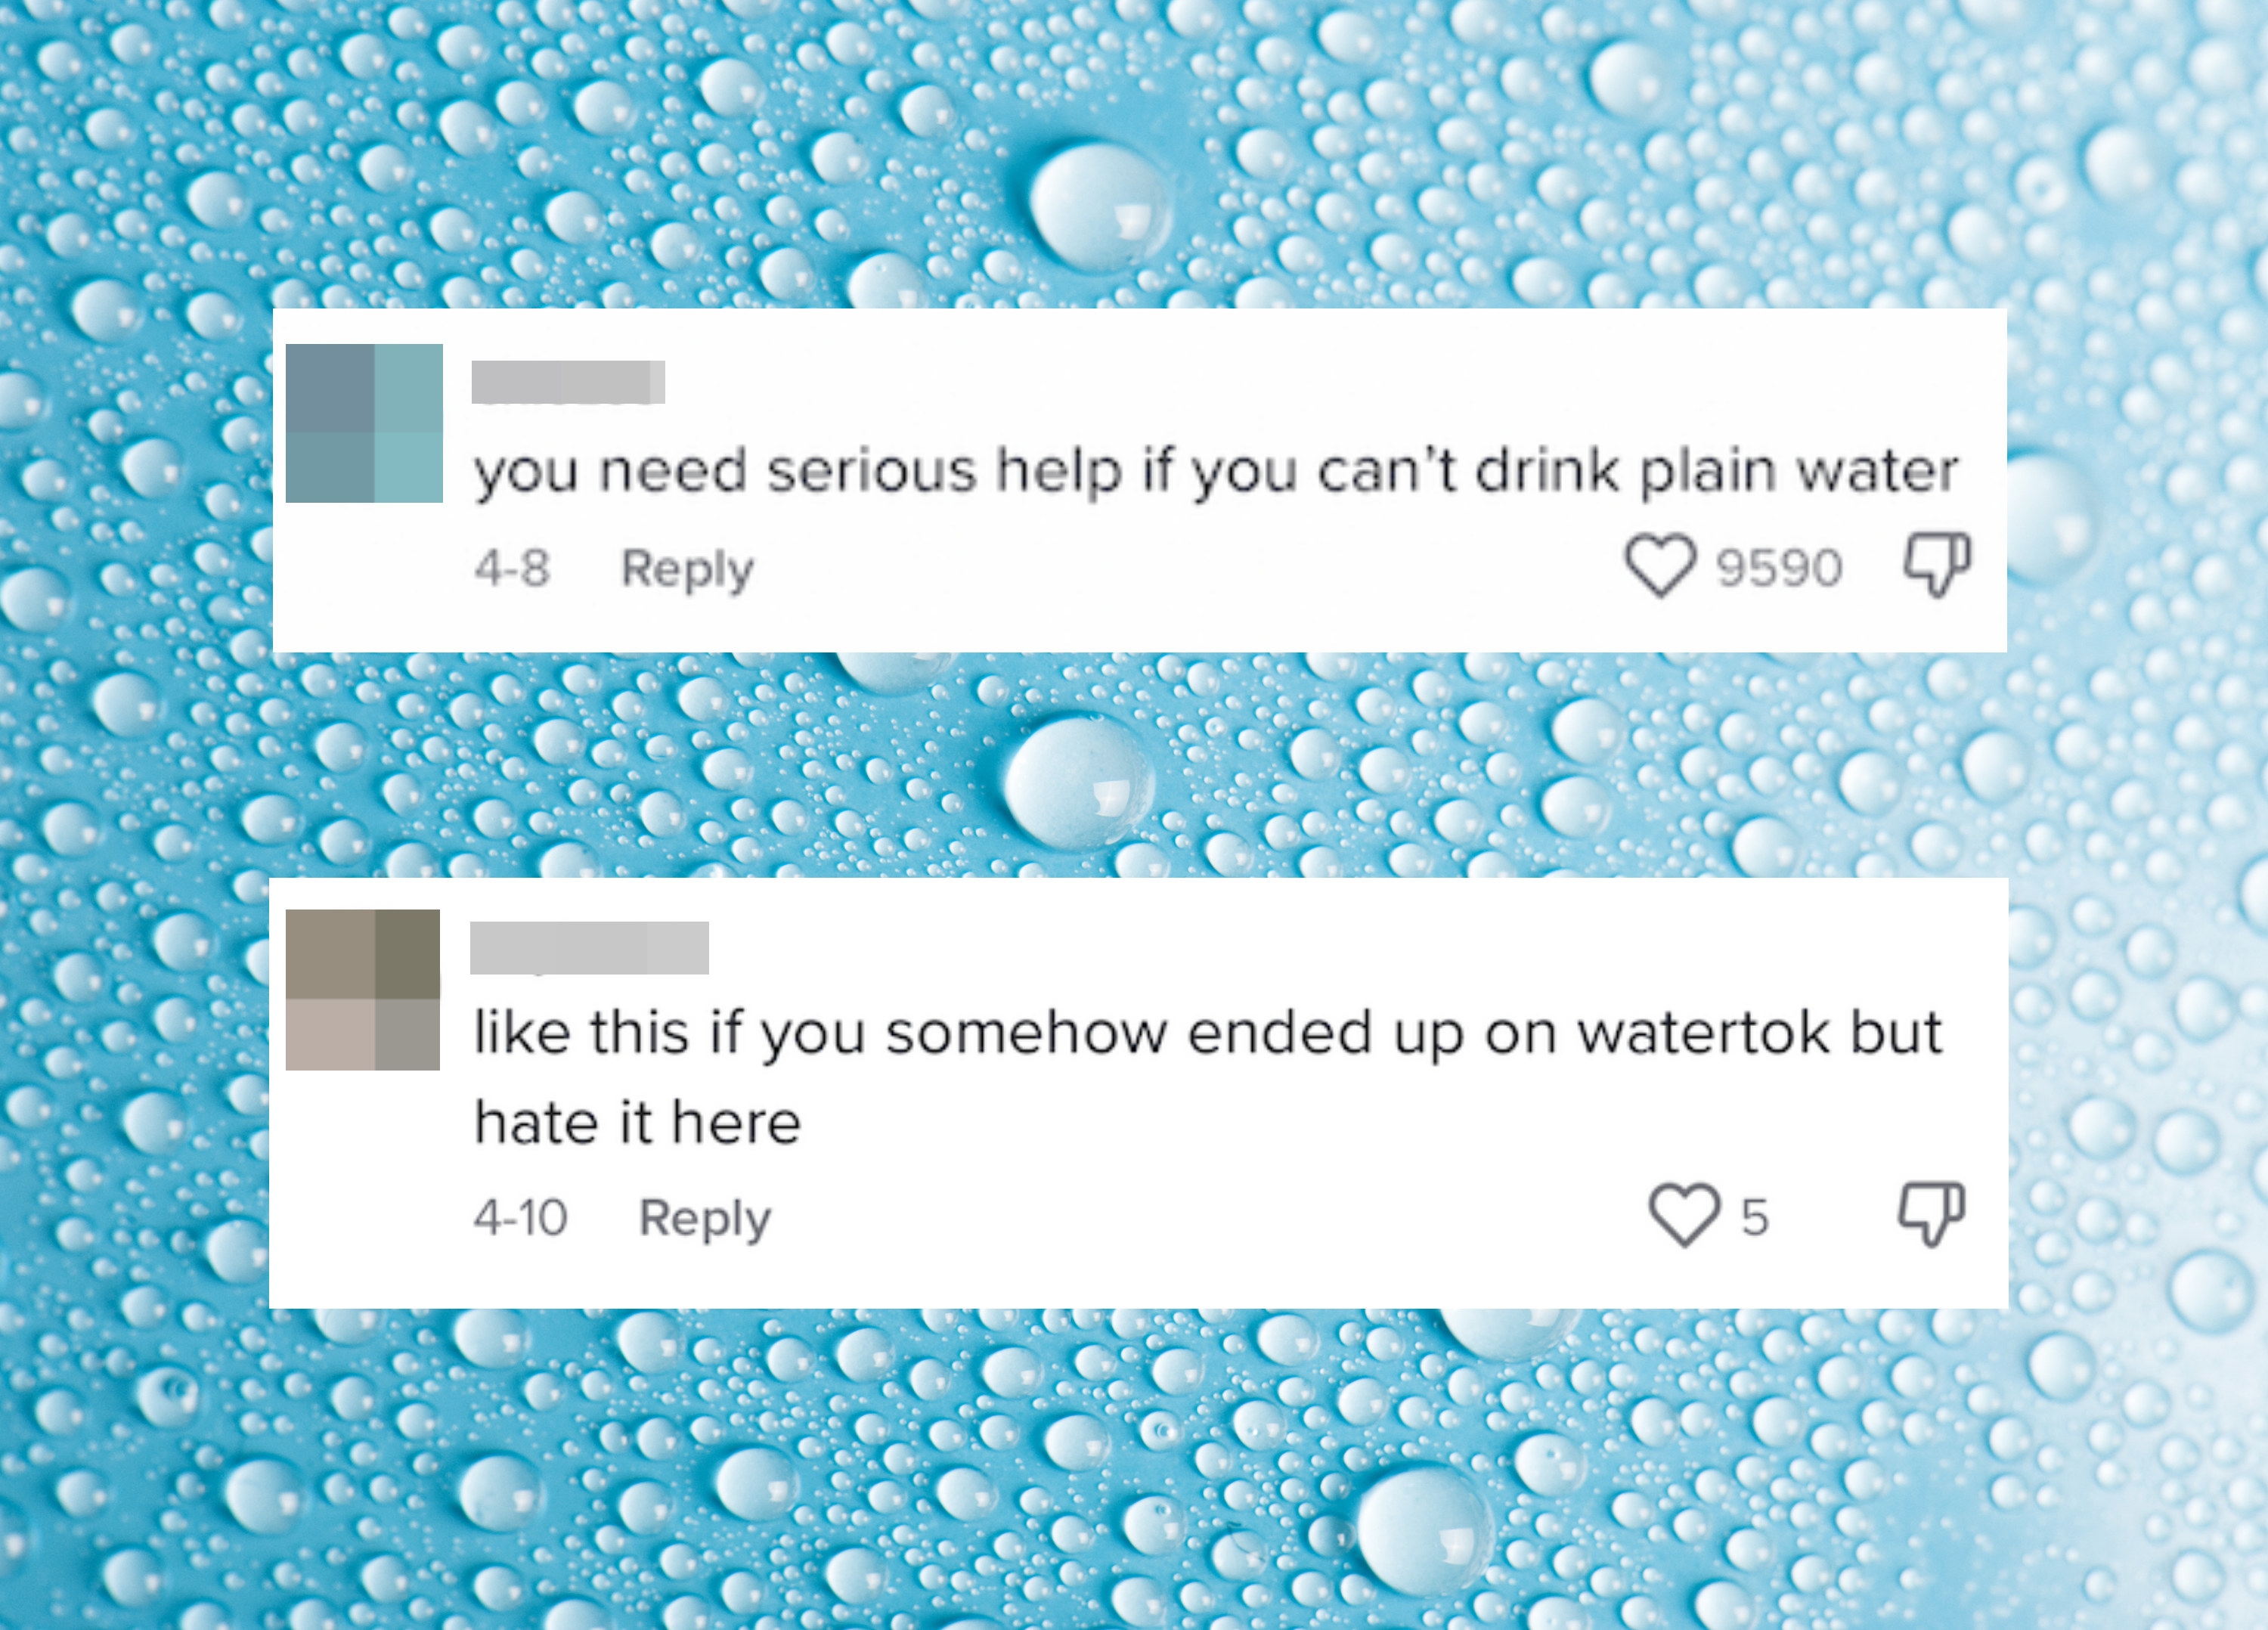 Comments saying &quot;you need serious help if you can&#x27;t drink plain water&quot; and &quot;like this is if you somehow ended up on watertok but hate it here&quot;